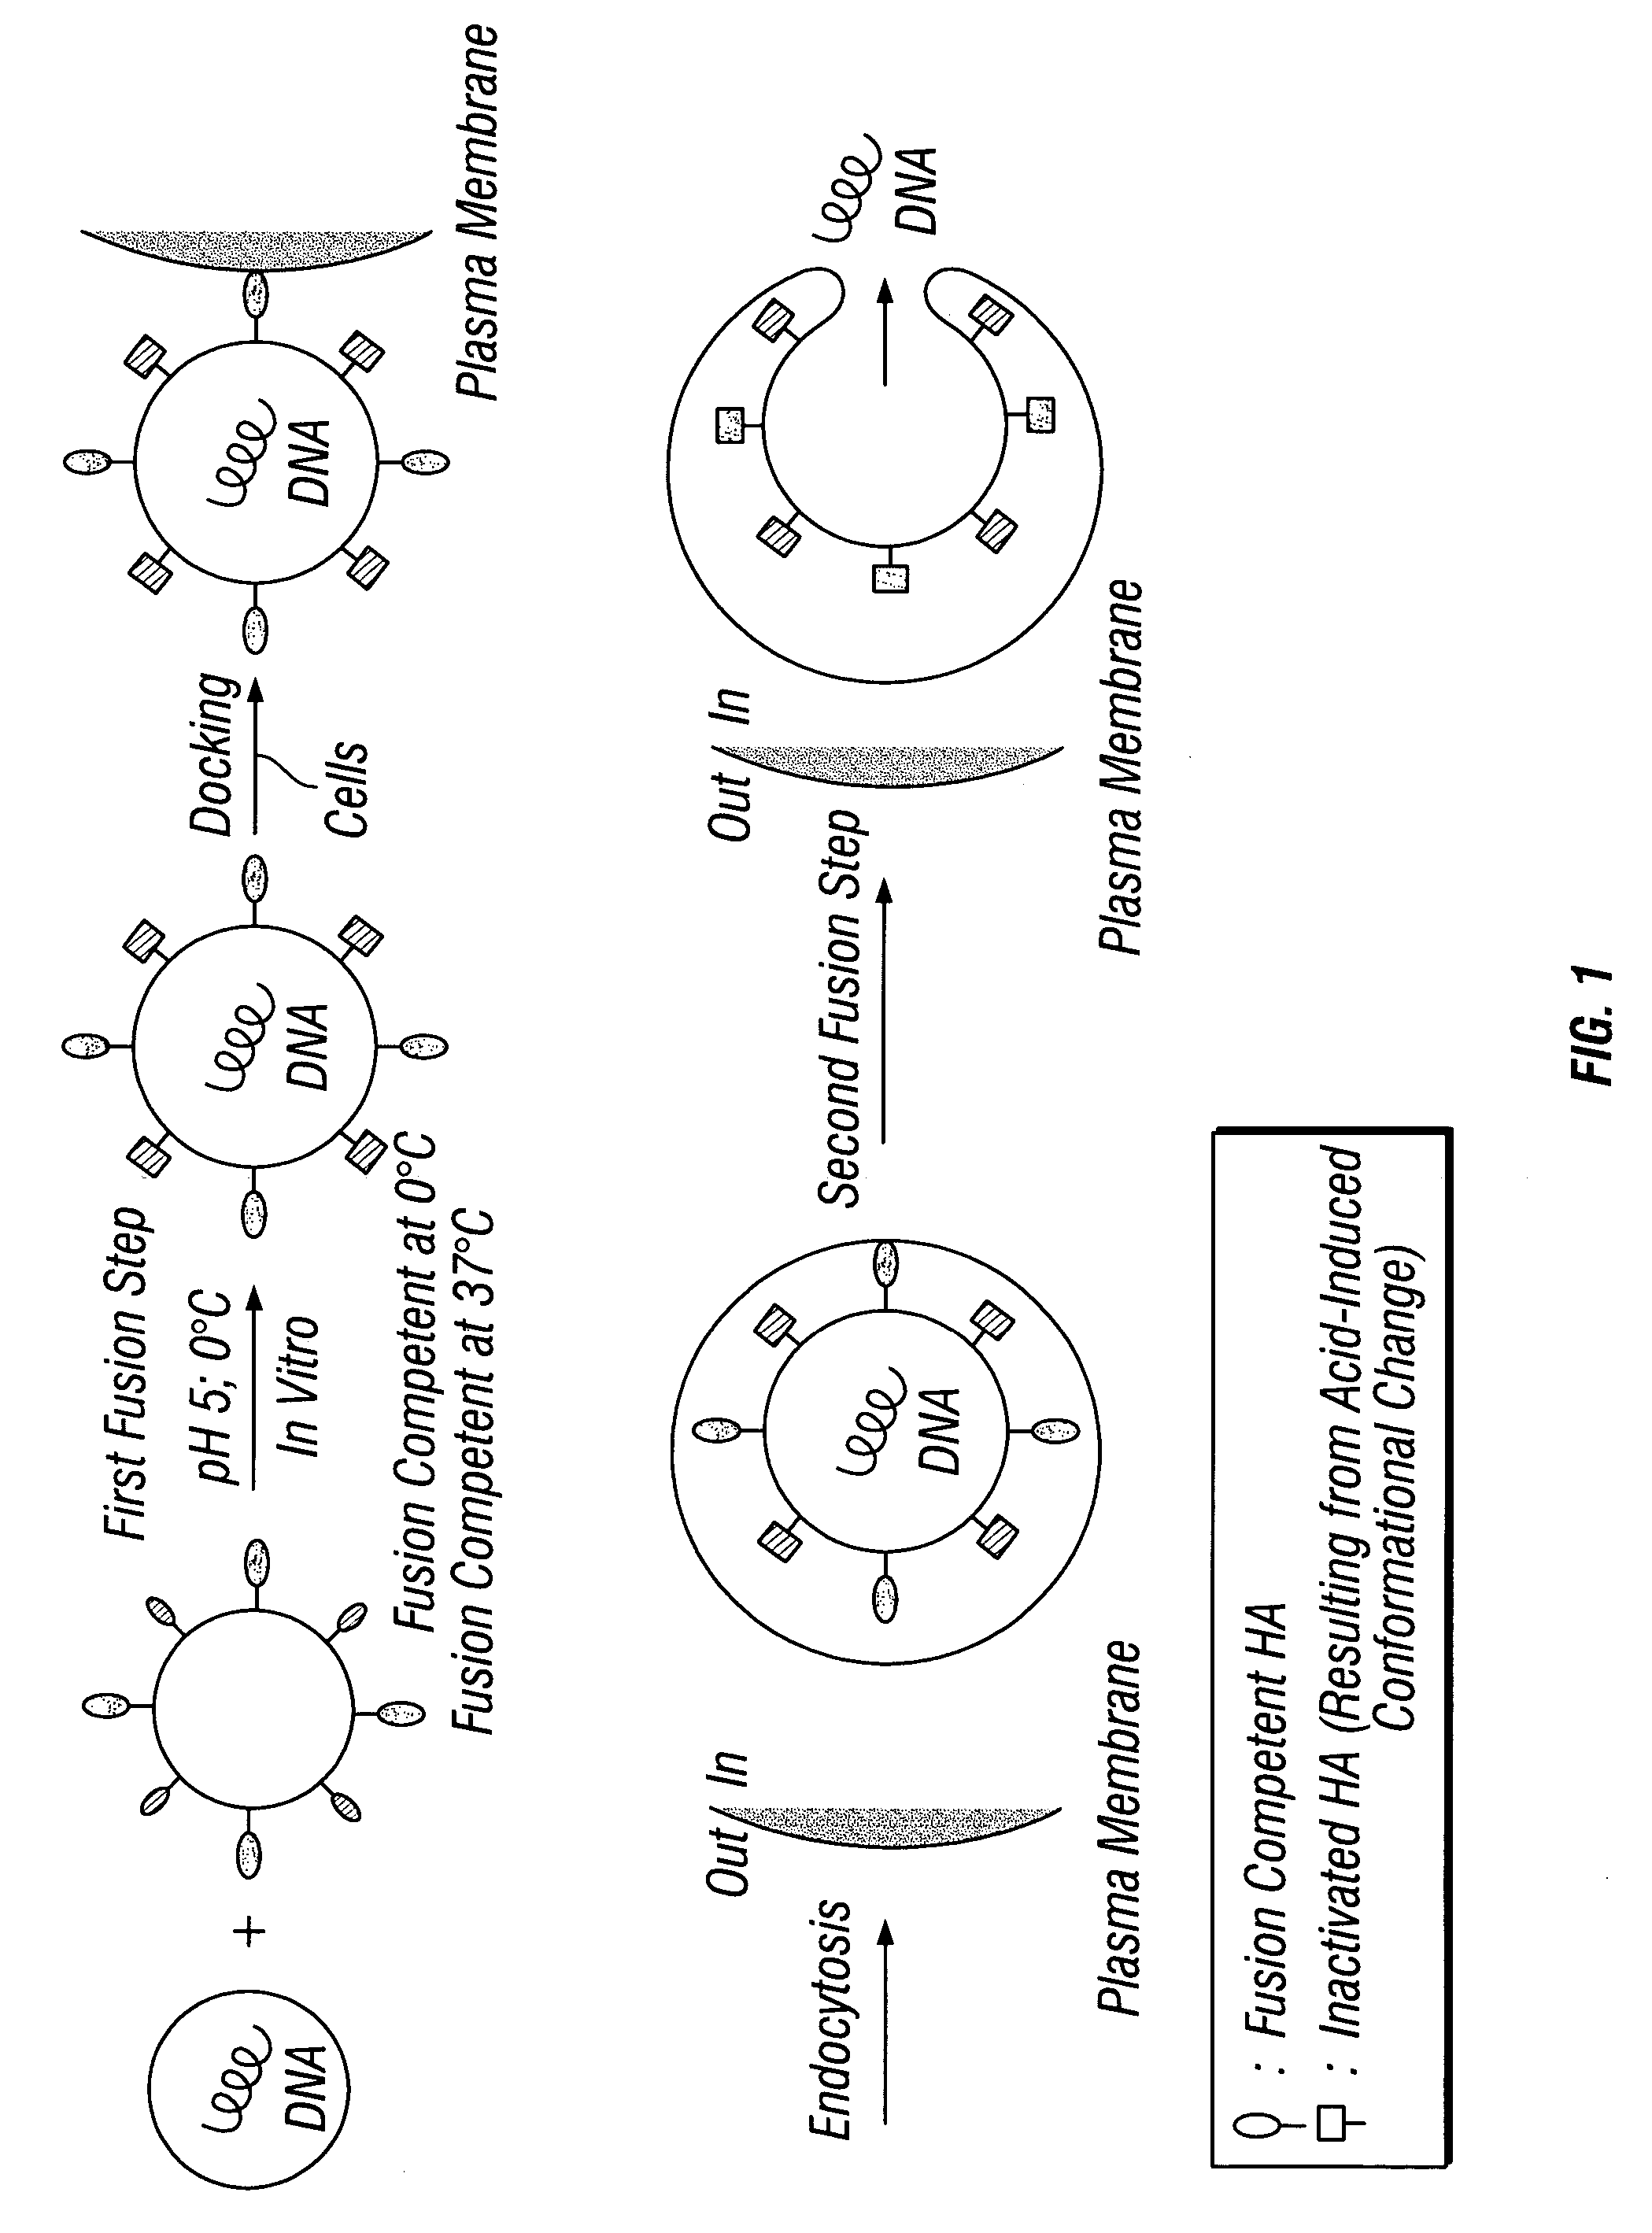 High-efficiency fusogenic vesicles, methods of producing them, and pharmaceutical compositions containing them